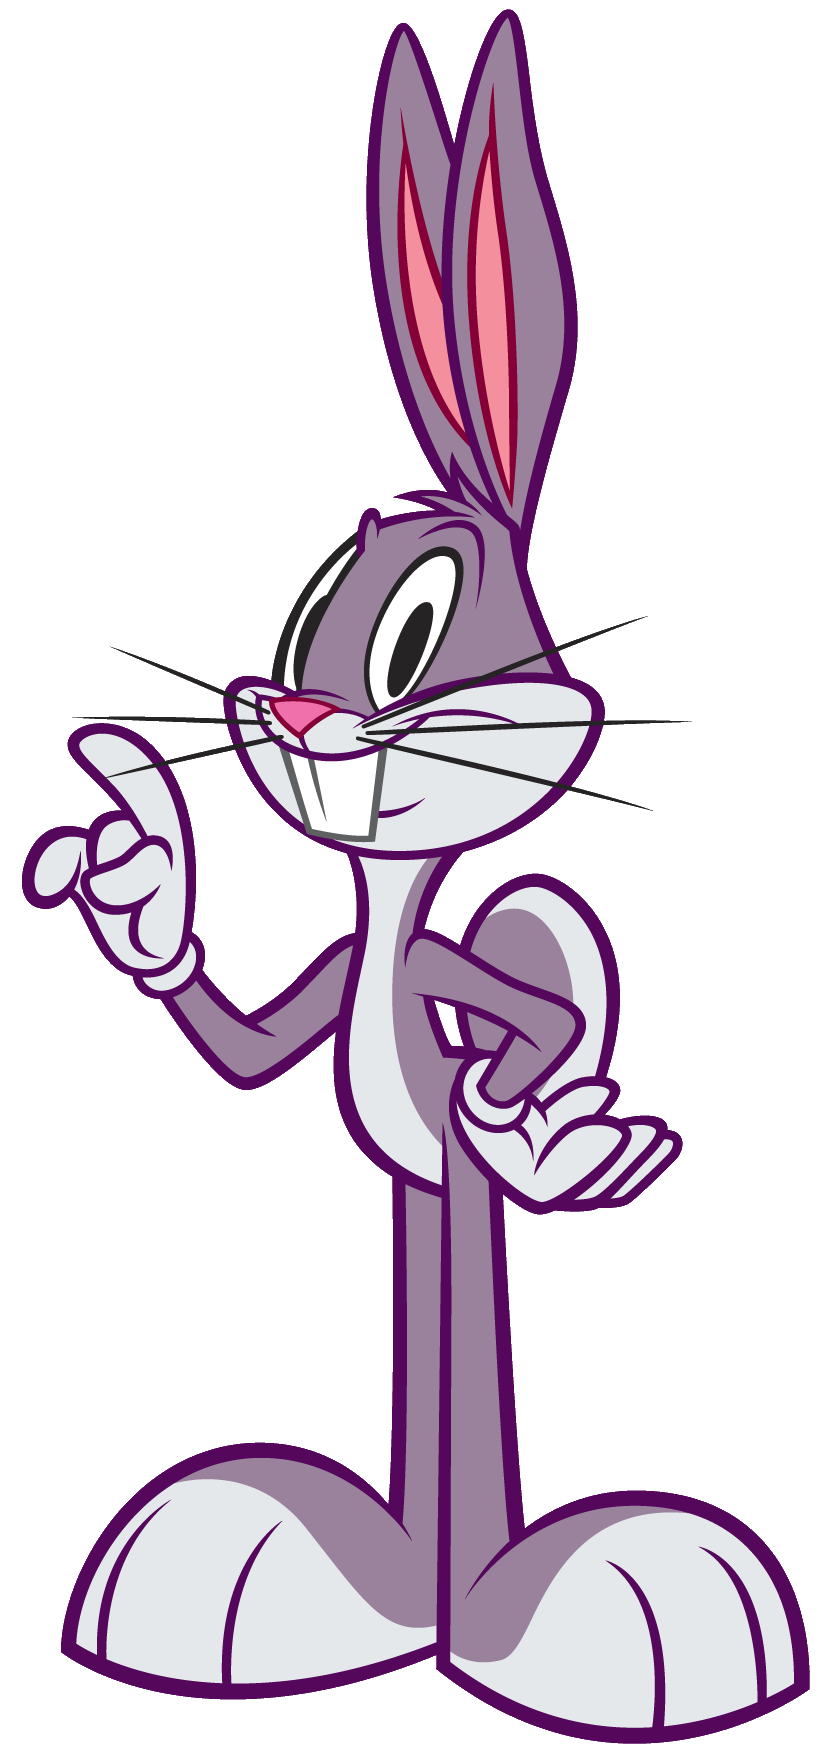 Image Bugs2png The Looney Tunes Show Wiki The Looney Tunes Show